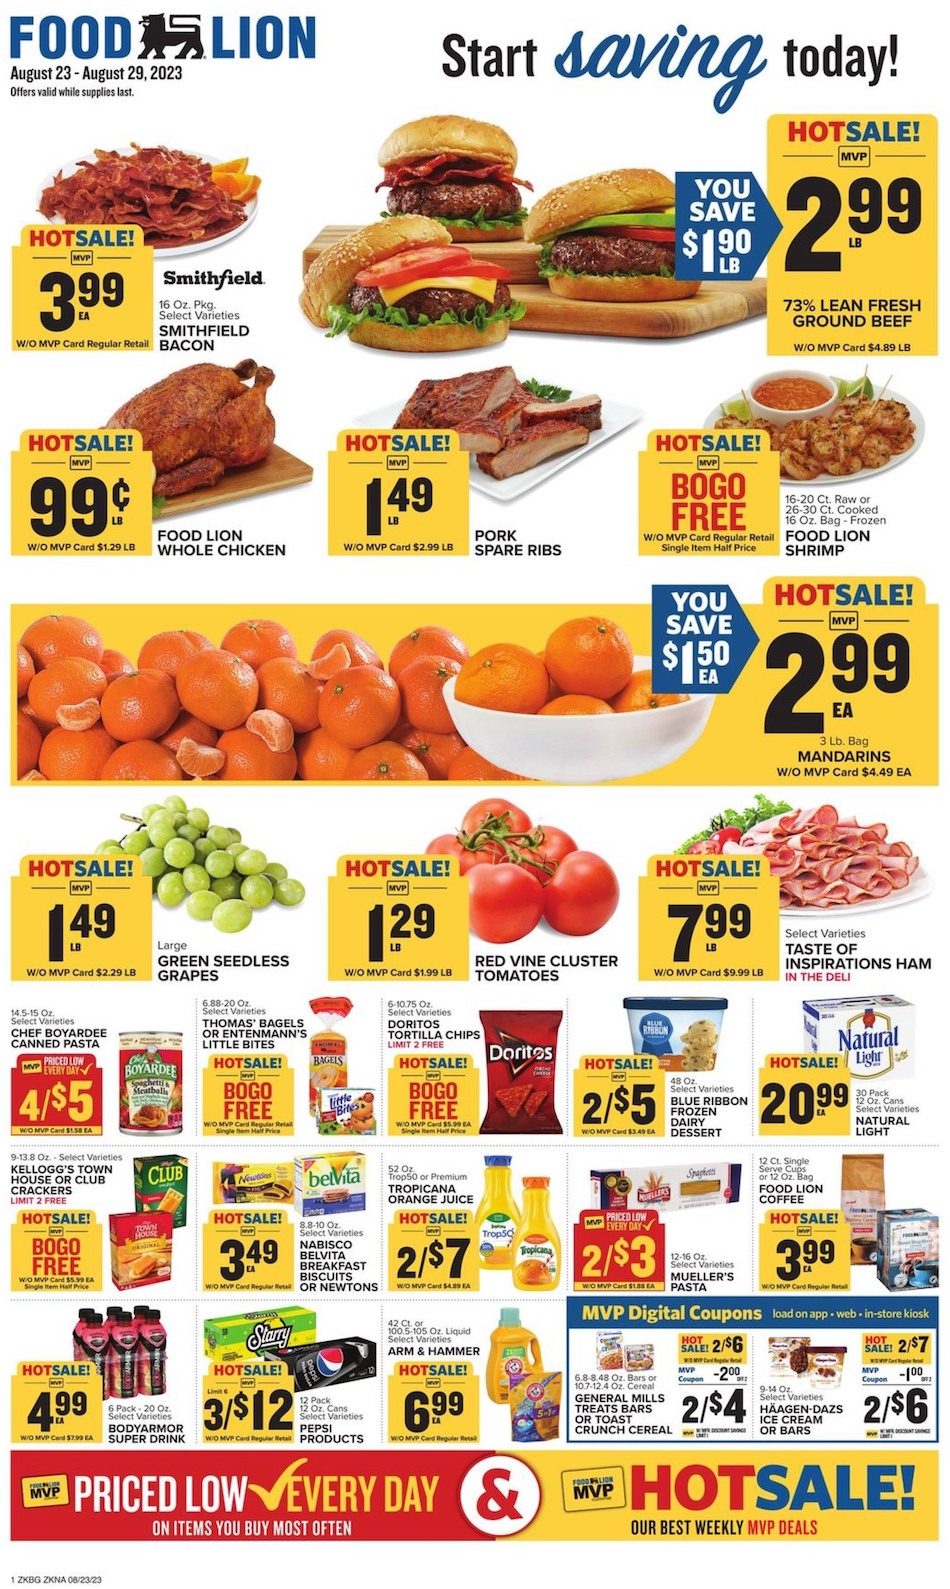 Food Lion Weekly Ad 23rd – 29th August 2023 Page 1